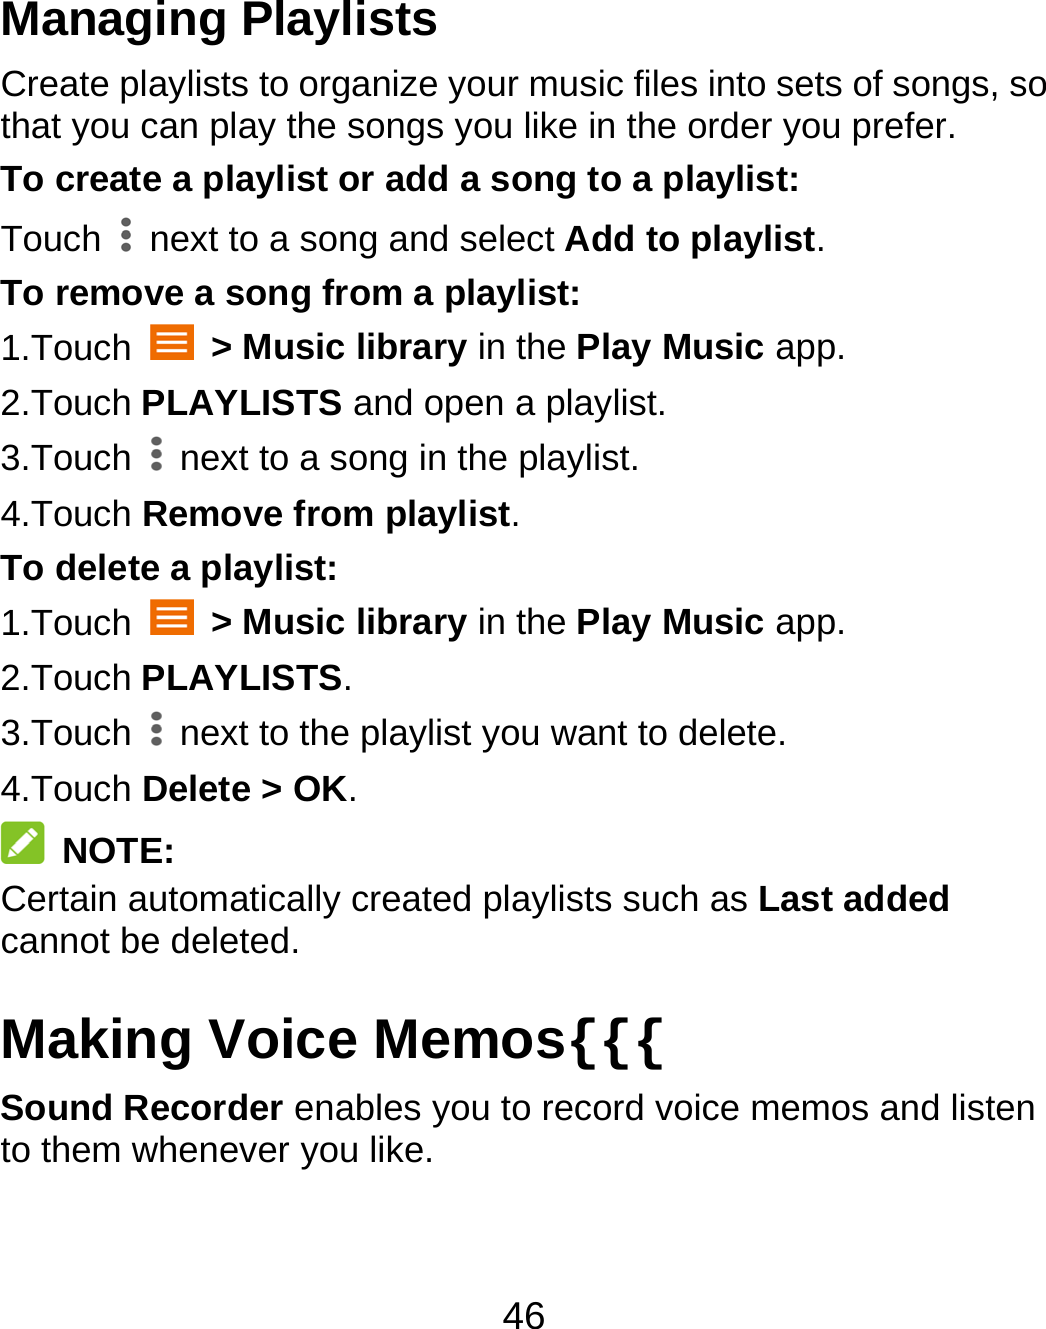 46 Managing Playlists Create playlists to organize your music files into sets of songs, so that you can play the songs you like in the order you prefer. To create a playlist or add a song to a playlist: Touch    next to a song and select Add to playlist. To remove a song from a playlist: 1.Touch   &gt; Music library in the Play Music app. 2.Touch PLAYLISTS and open a playlist. 3.Touch    next to a song in the playlist. 4.Touch Remove from playlist. To delete a playlist: 1.Touch   &gt; Music library in the Play Music app. 2.Touch PLAYLISTS. 3.Touch    next to the playlist you want to delete. 4.Touch Delete &gt; OK.  NOTE: Certain automatically created playlists such as Last added cannot be deleted. Making Voice Memos{{{ Sound Recorder enables you to record voice memos and listen to them whenever you like. 